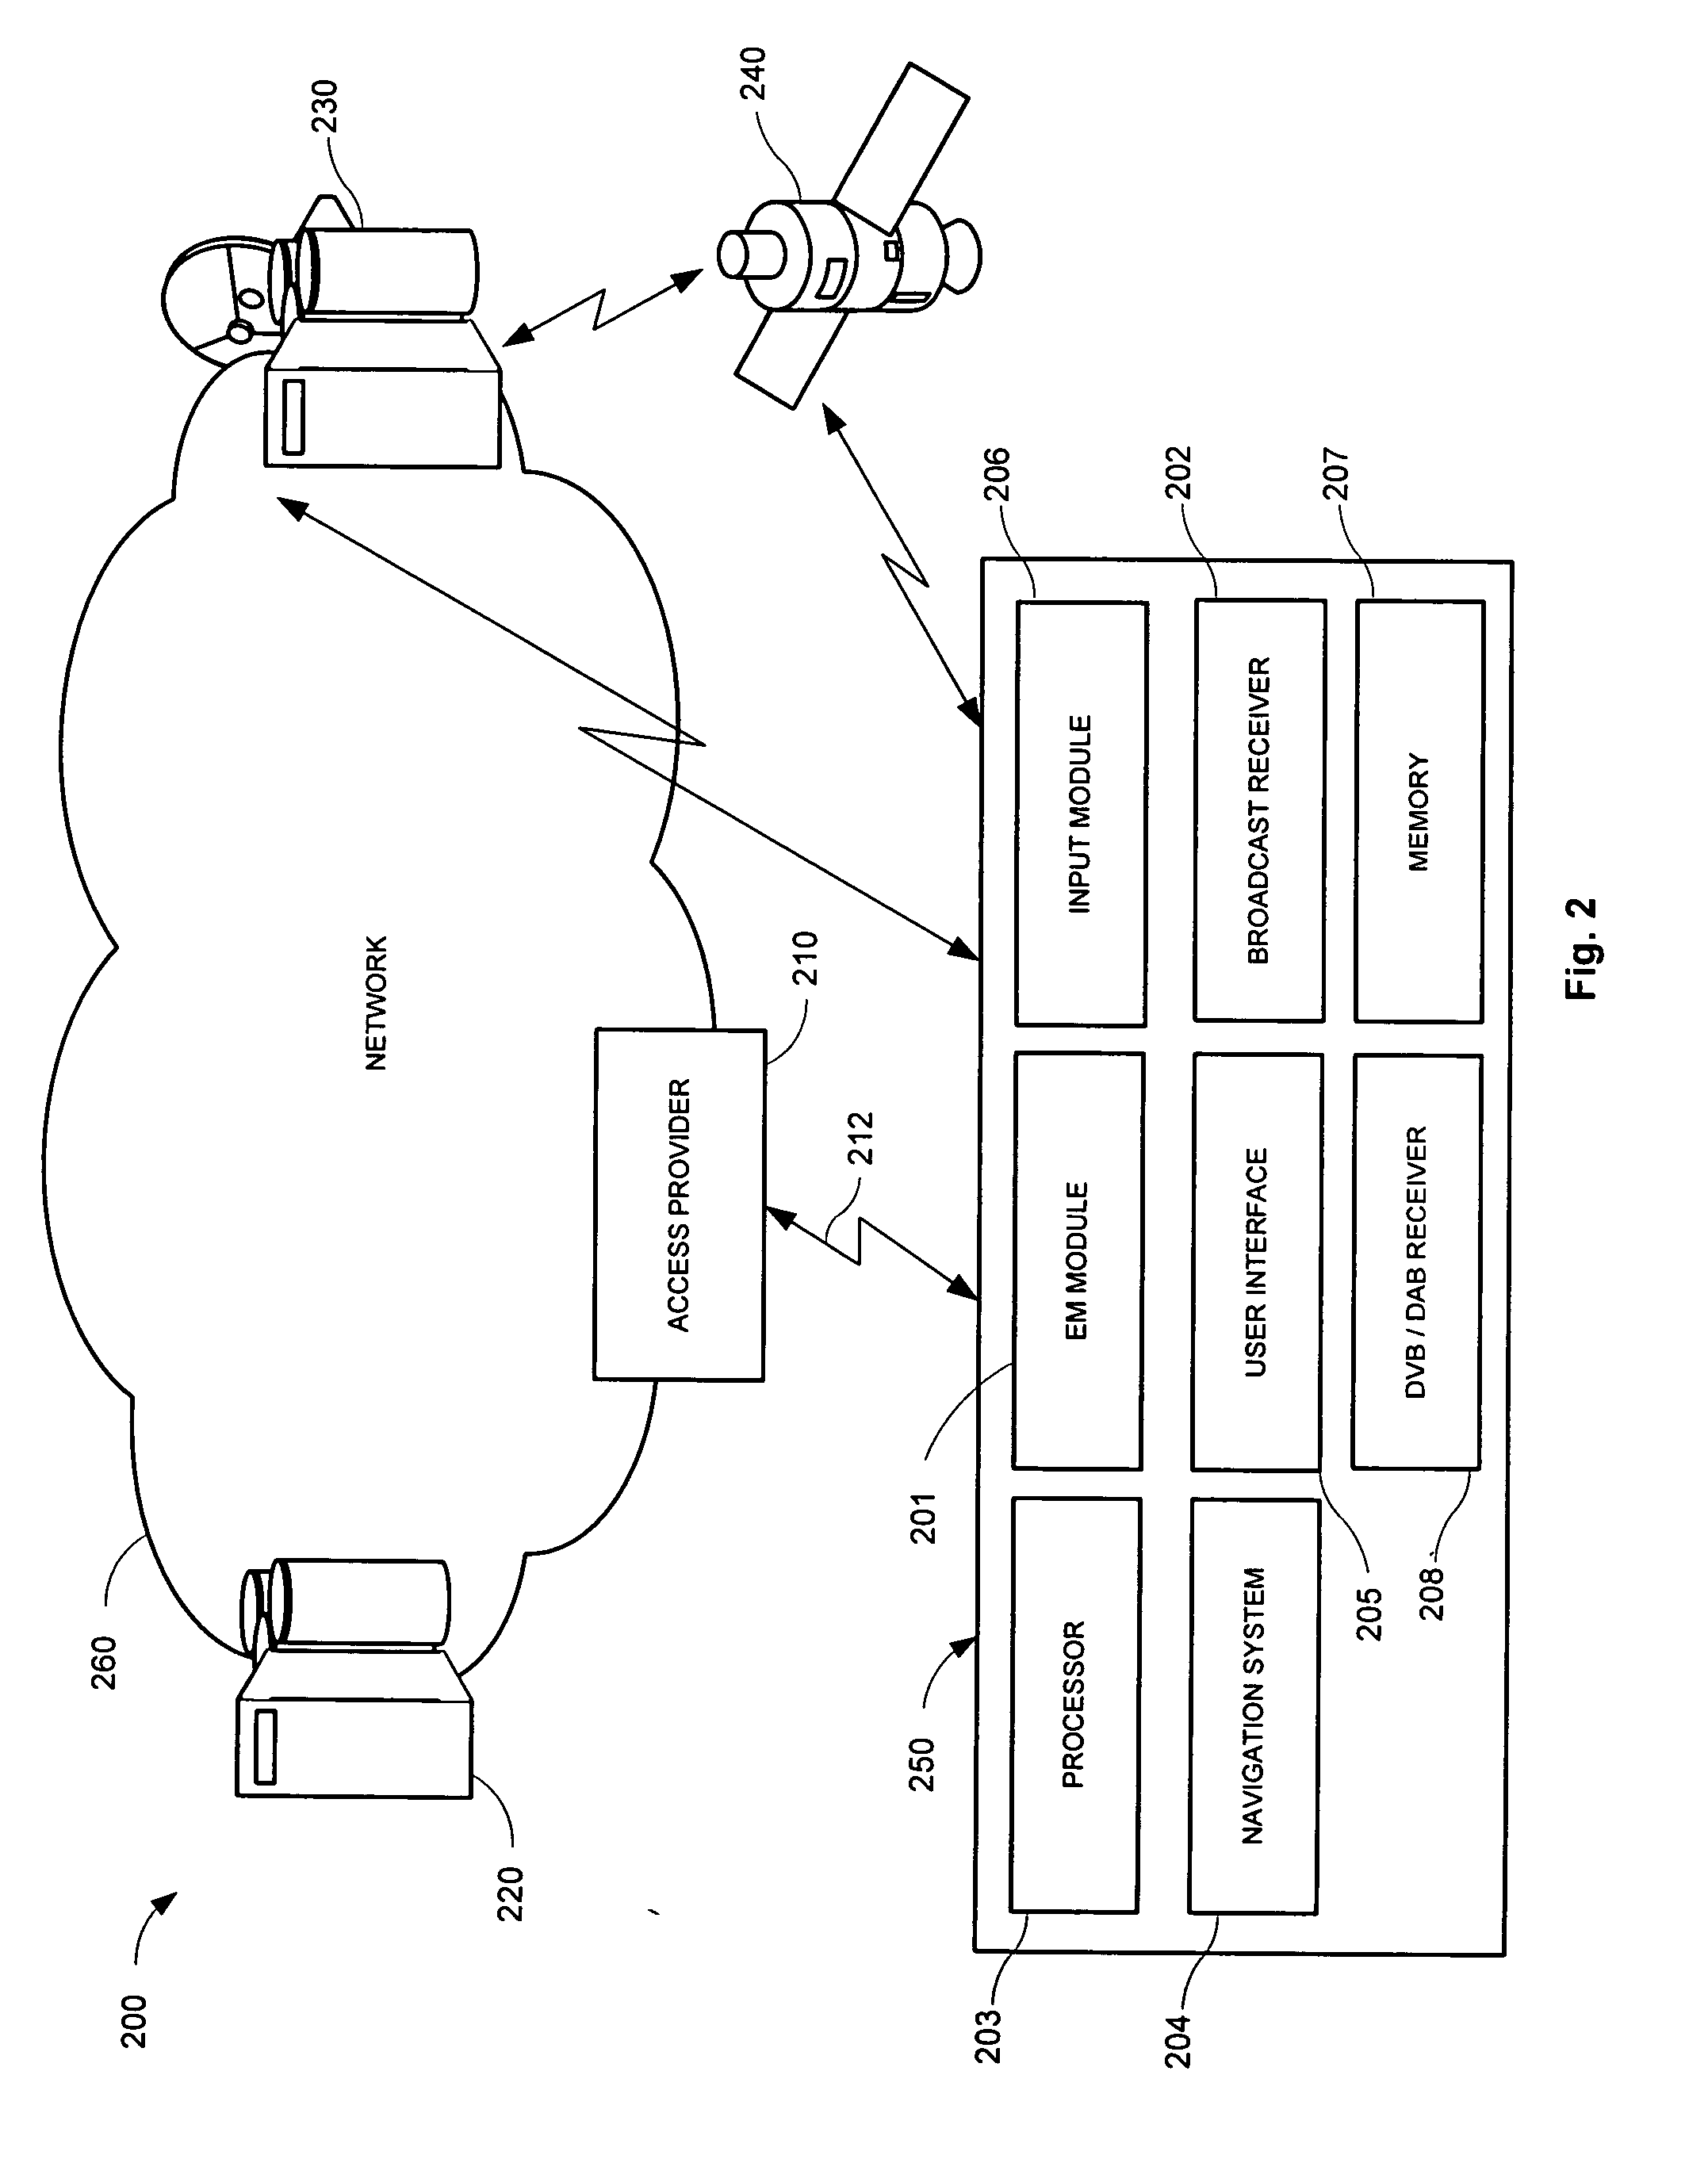 Secure networked system for controlling mobile access to encrypted data services